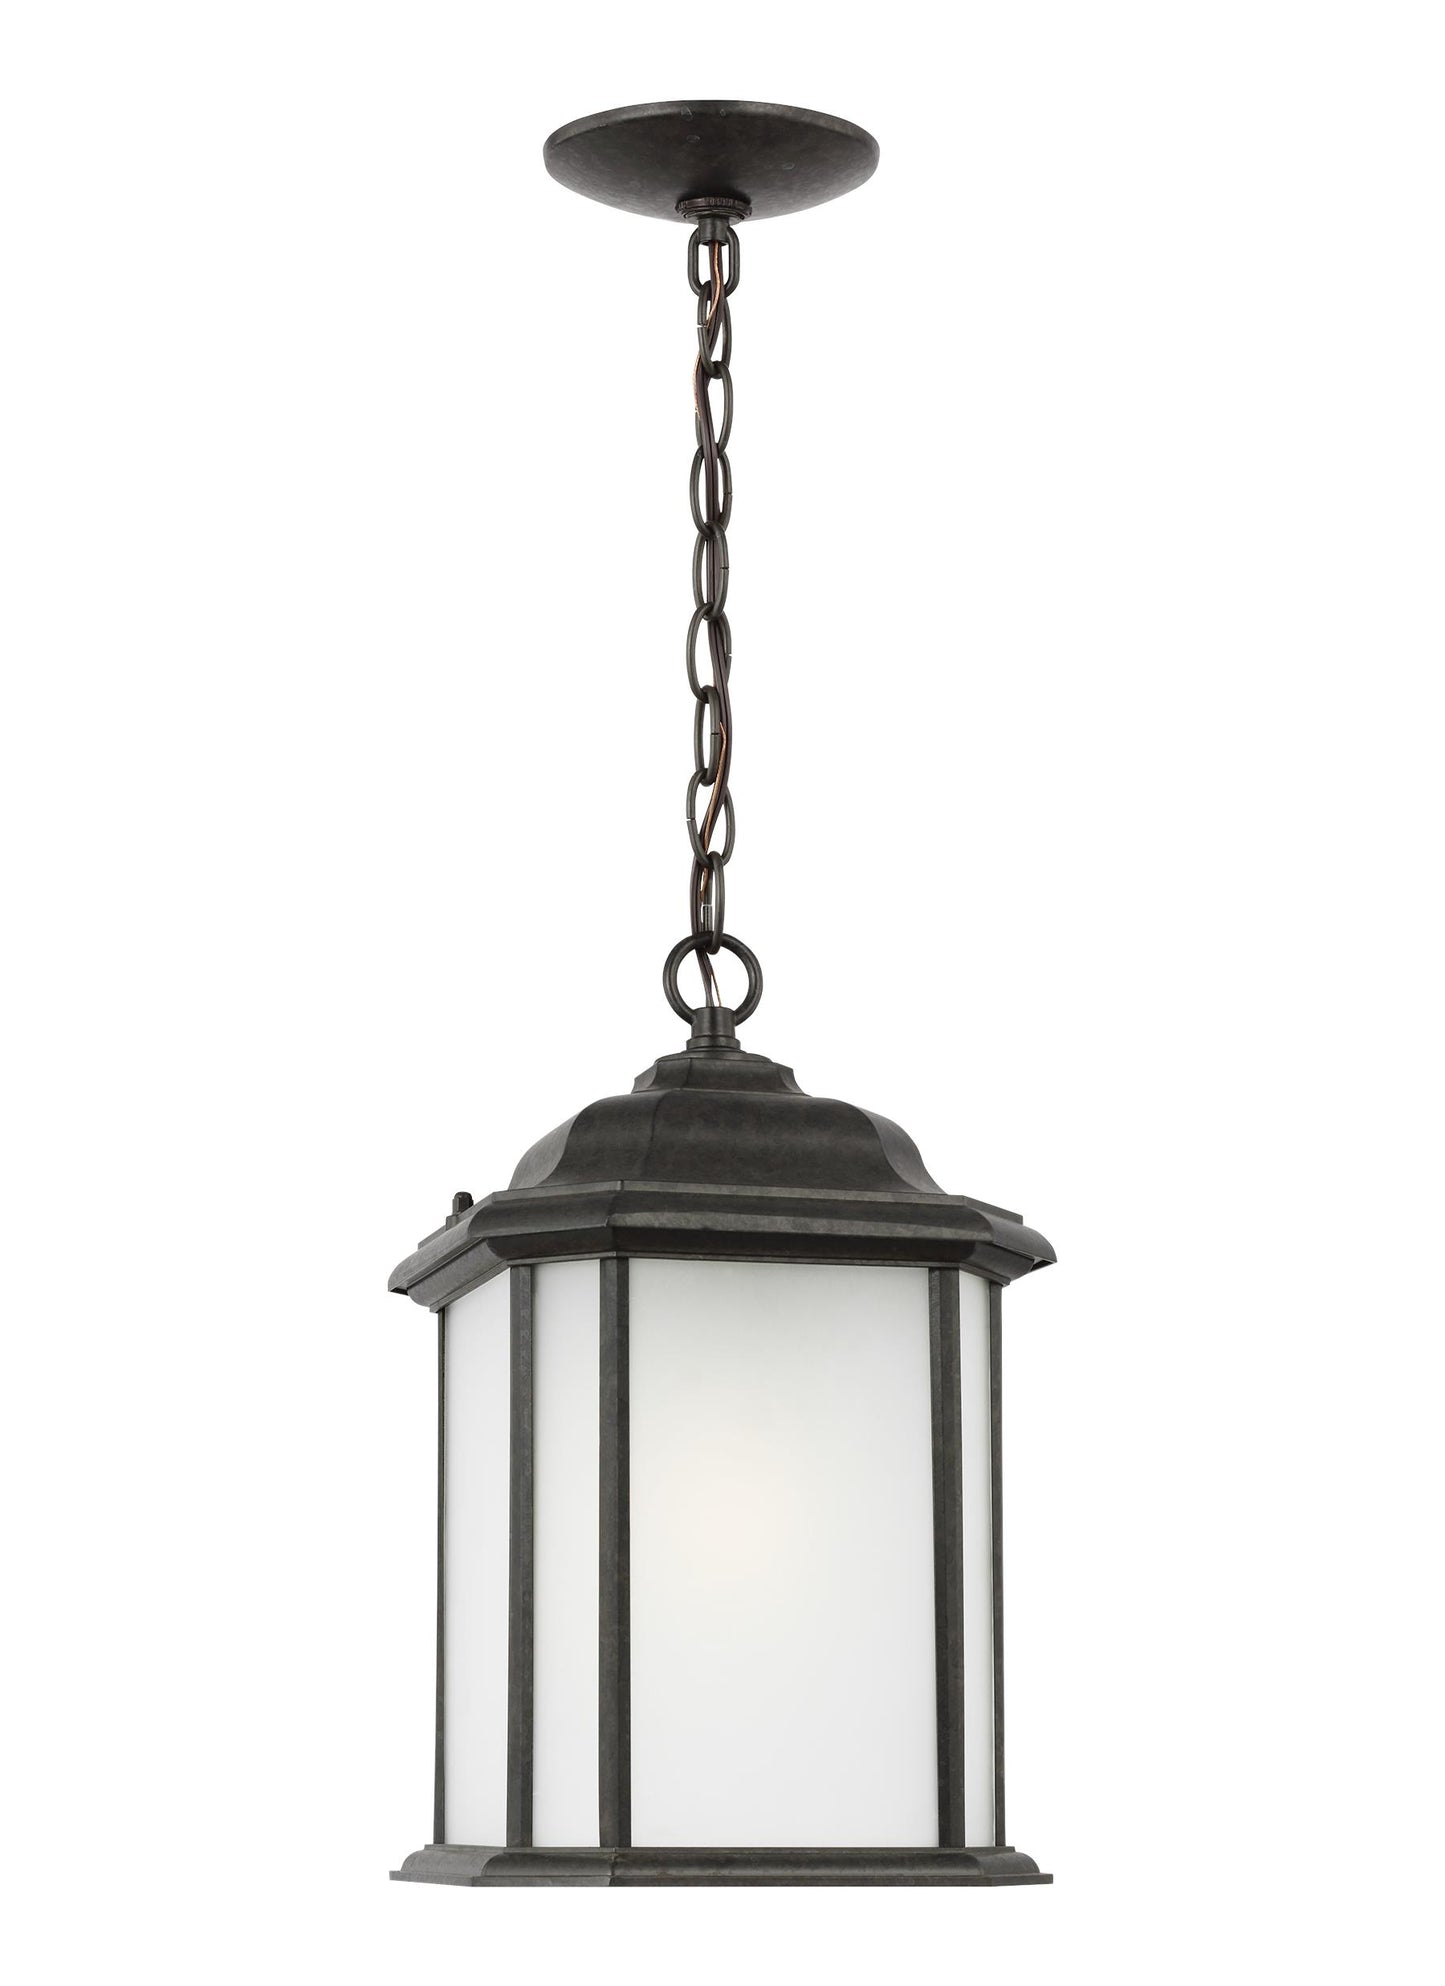 Kent traditional 1-light outdoor exterior ceiling hanging pendant in oxford bronze finish with satin etched glass panels